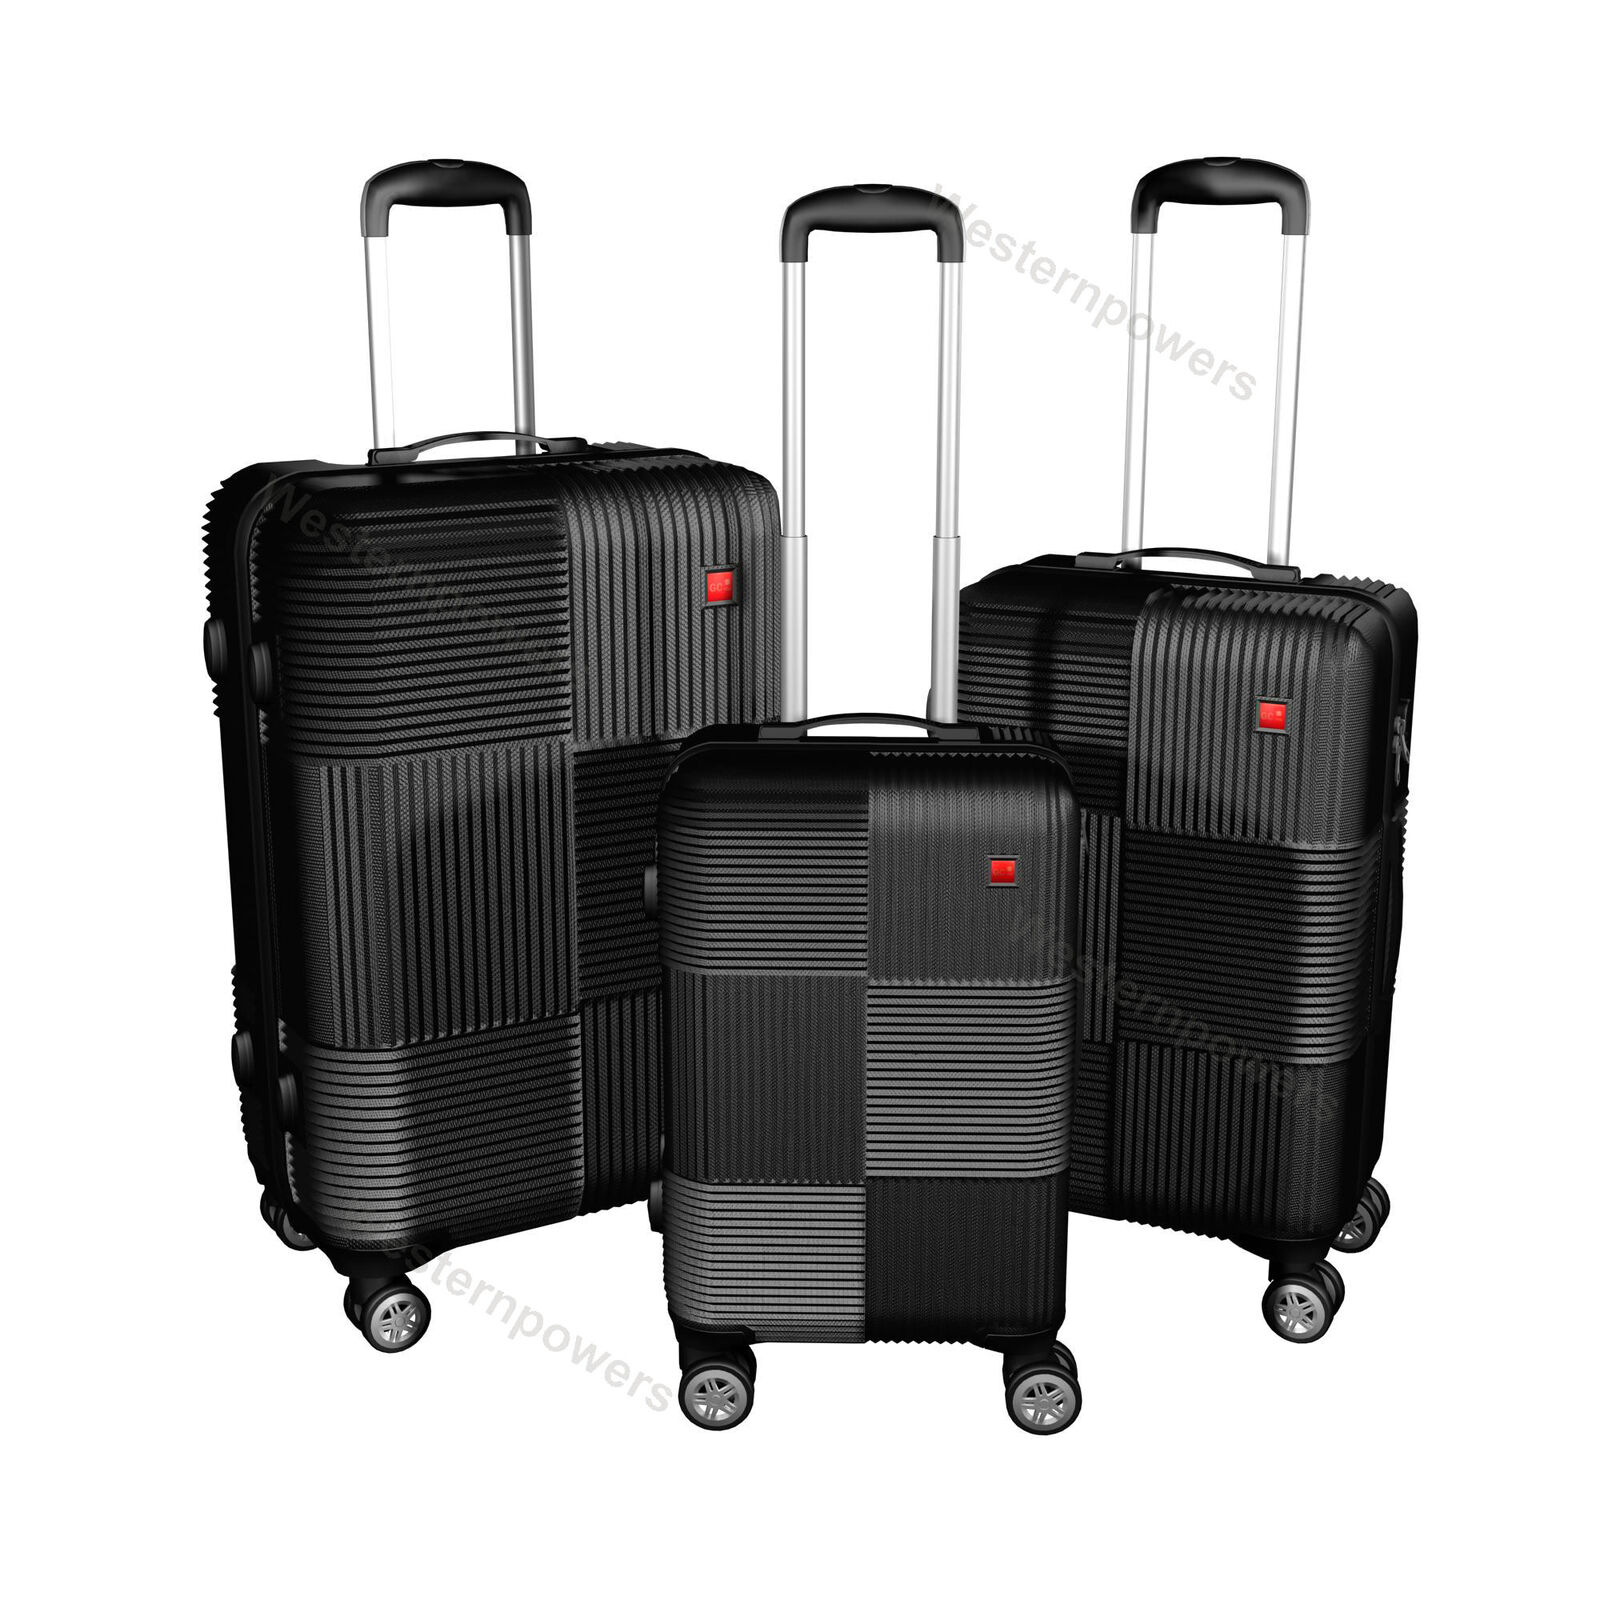 Spinner carry-on luggage